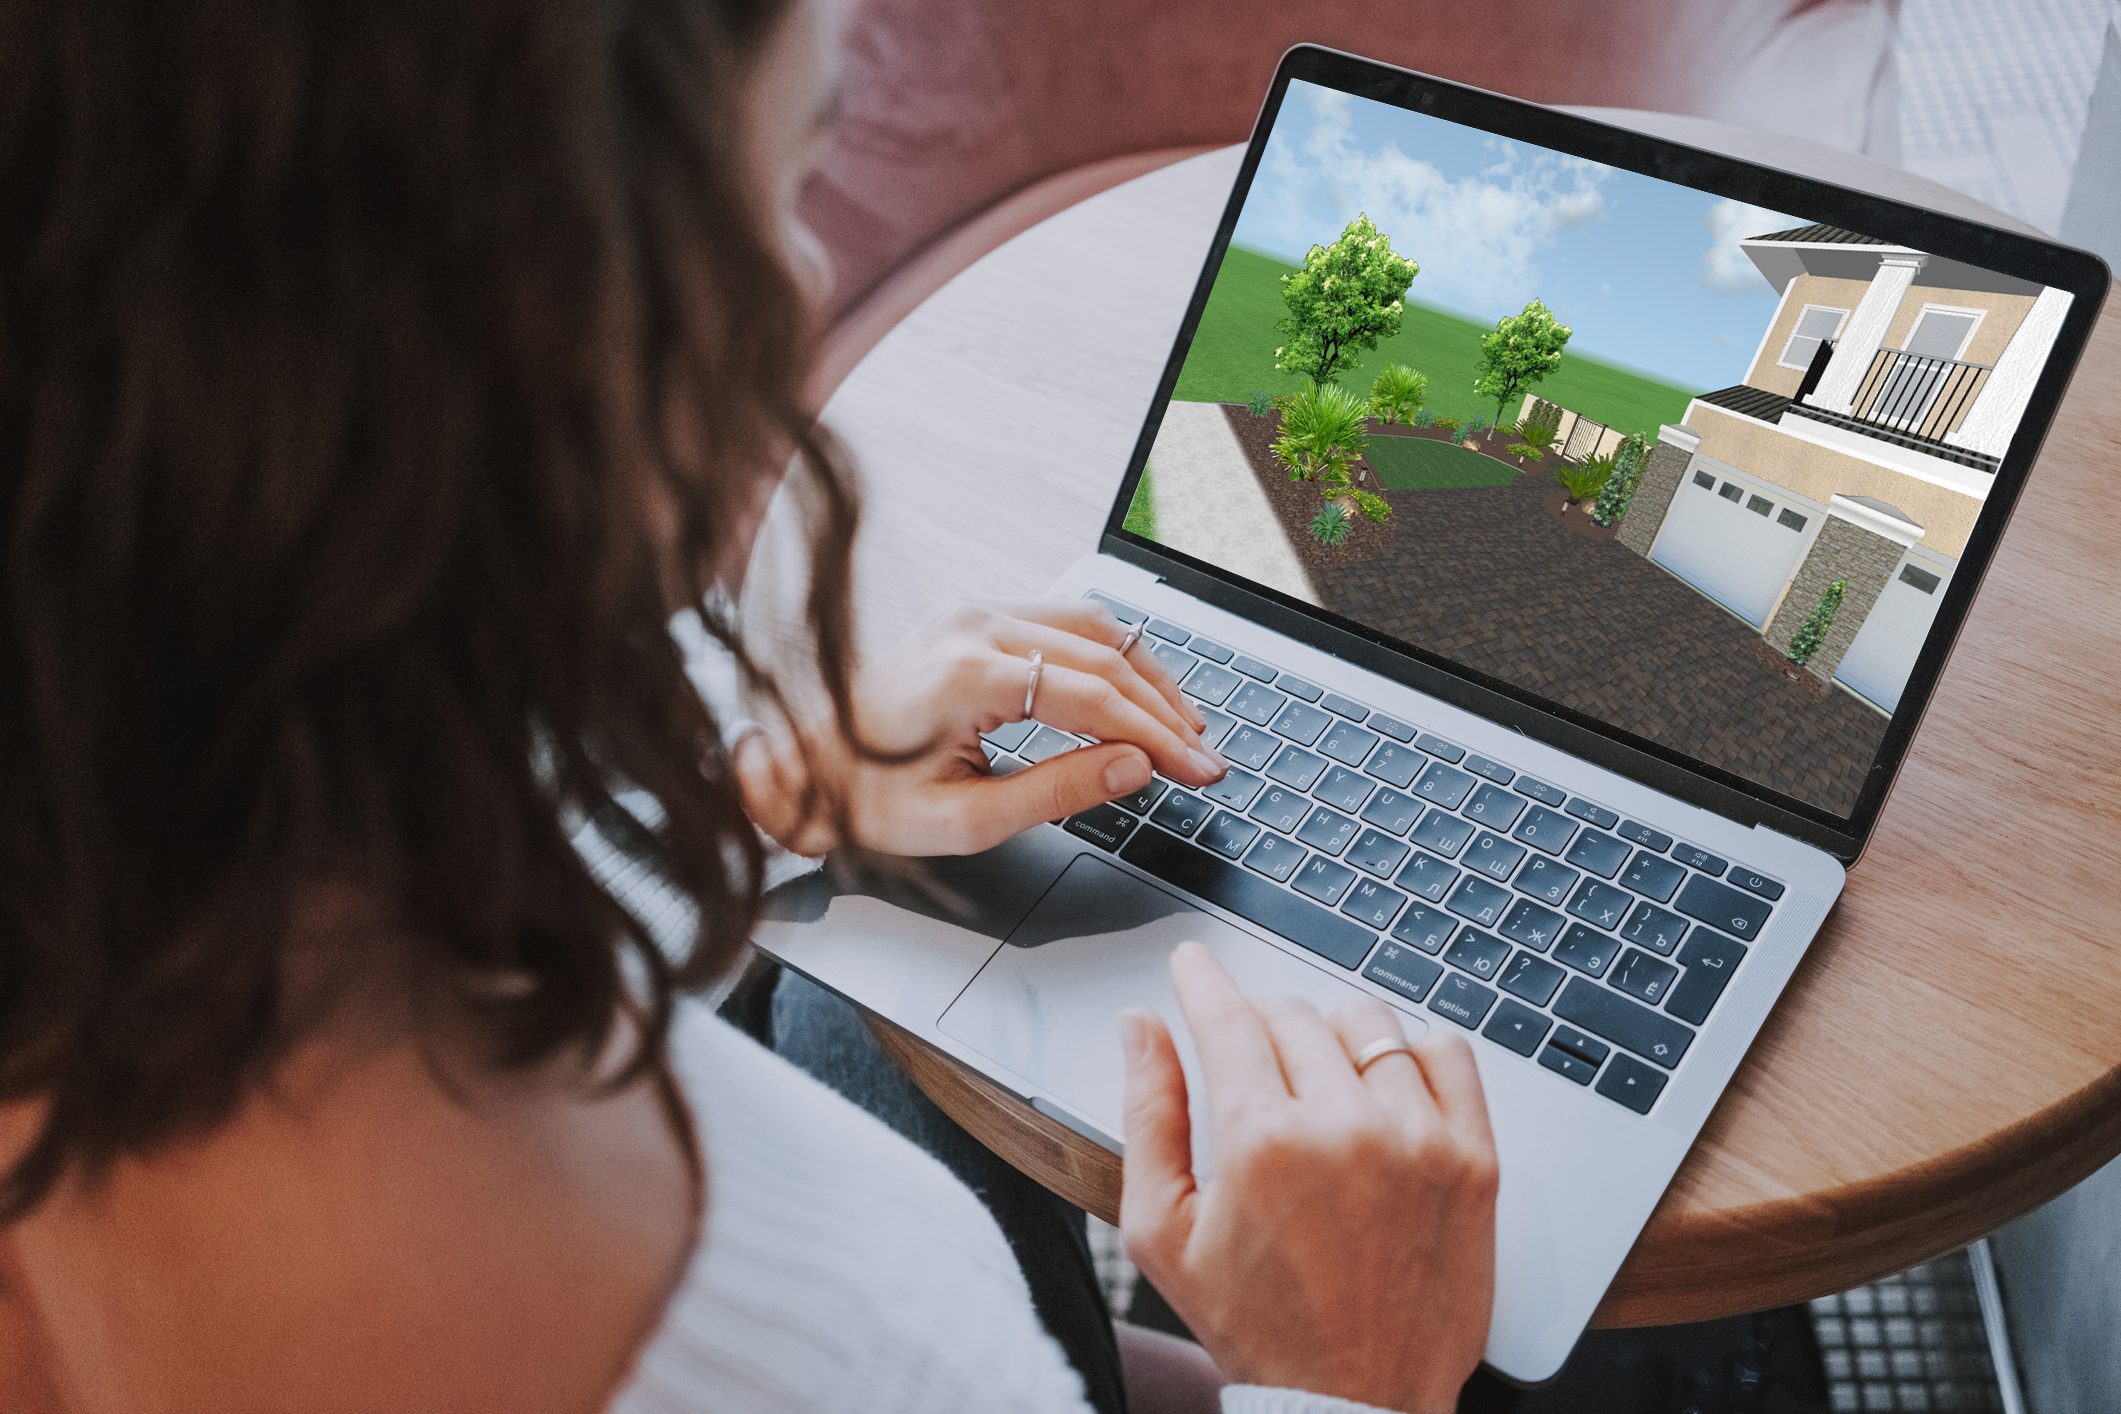 3D render of a front yard lawn in laptop from behind an unrecognizable woman